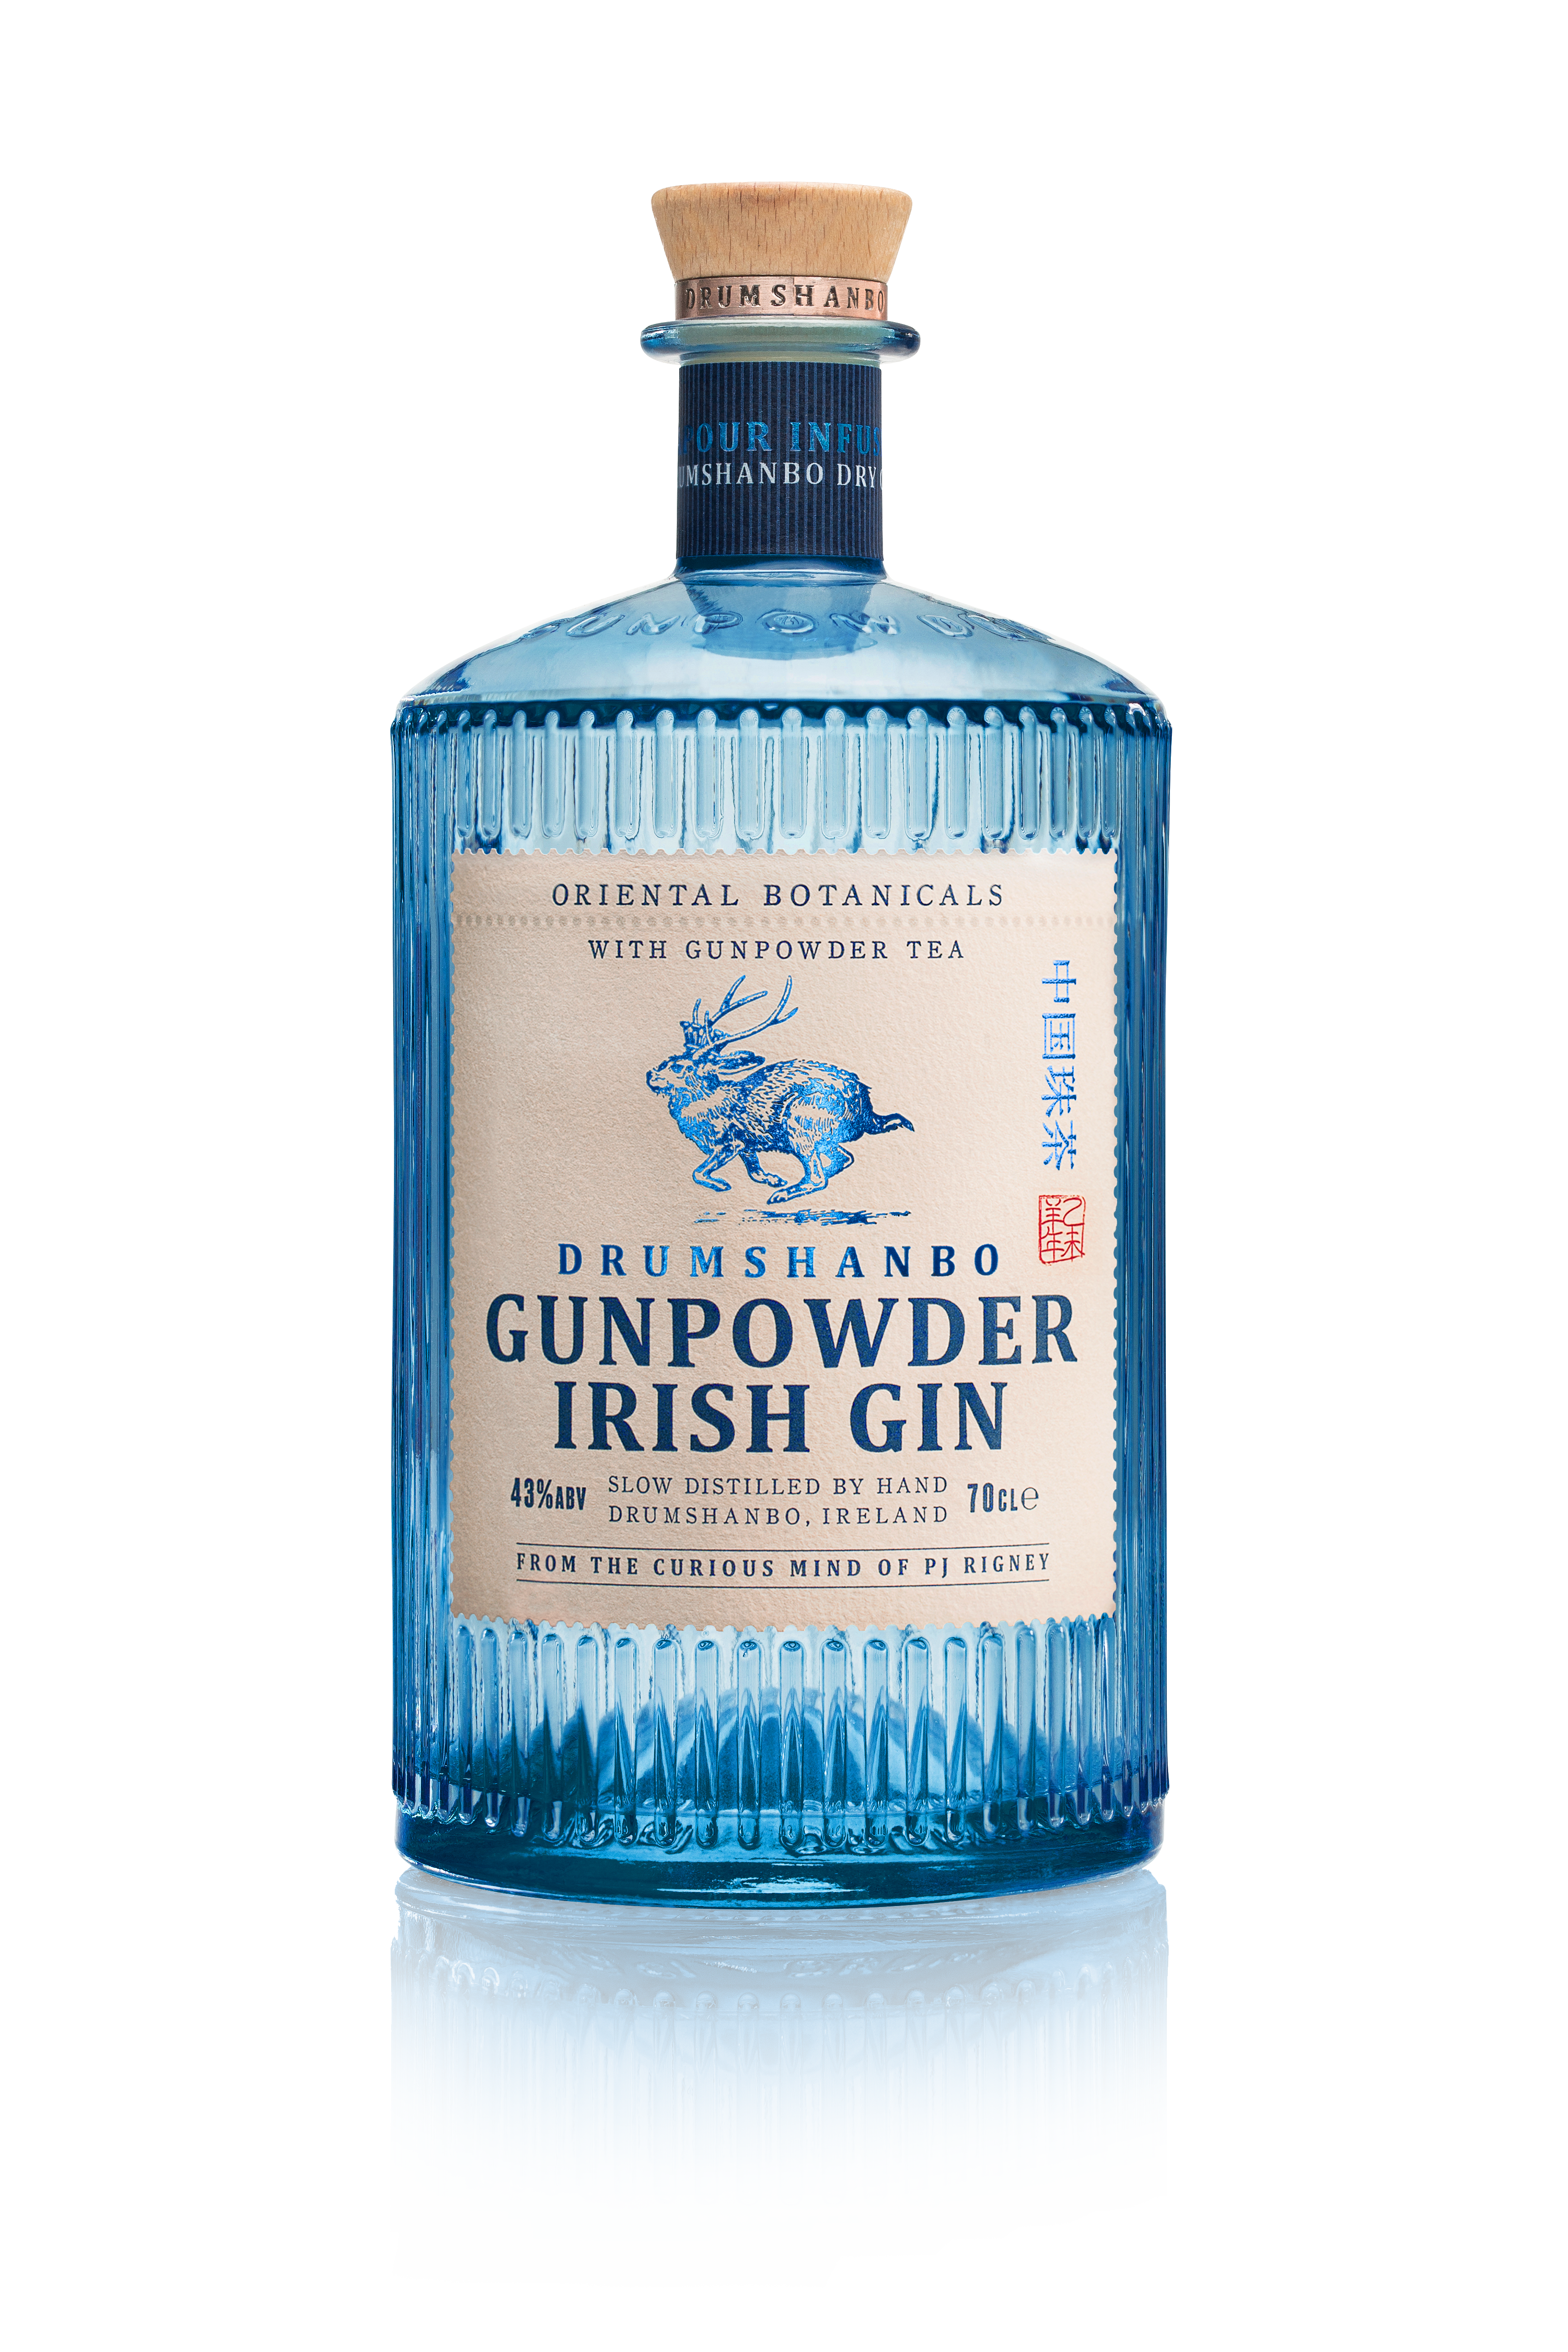 For the first time ever, an Irish gin brand has won a Flaviar Best Spirit Award and claimed the Best Gin title.